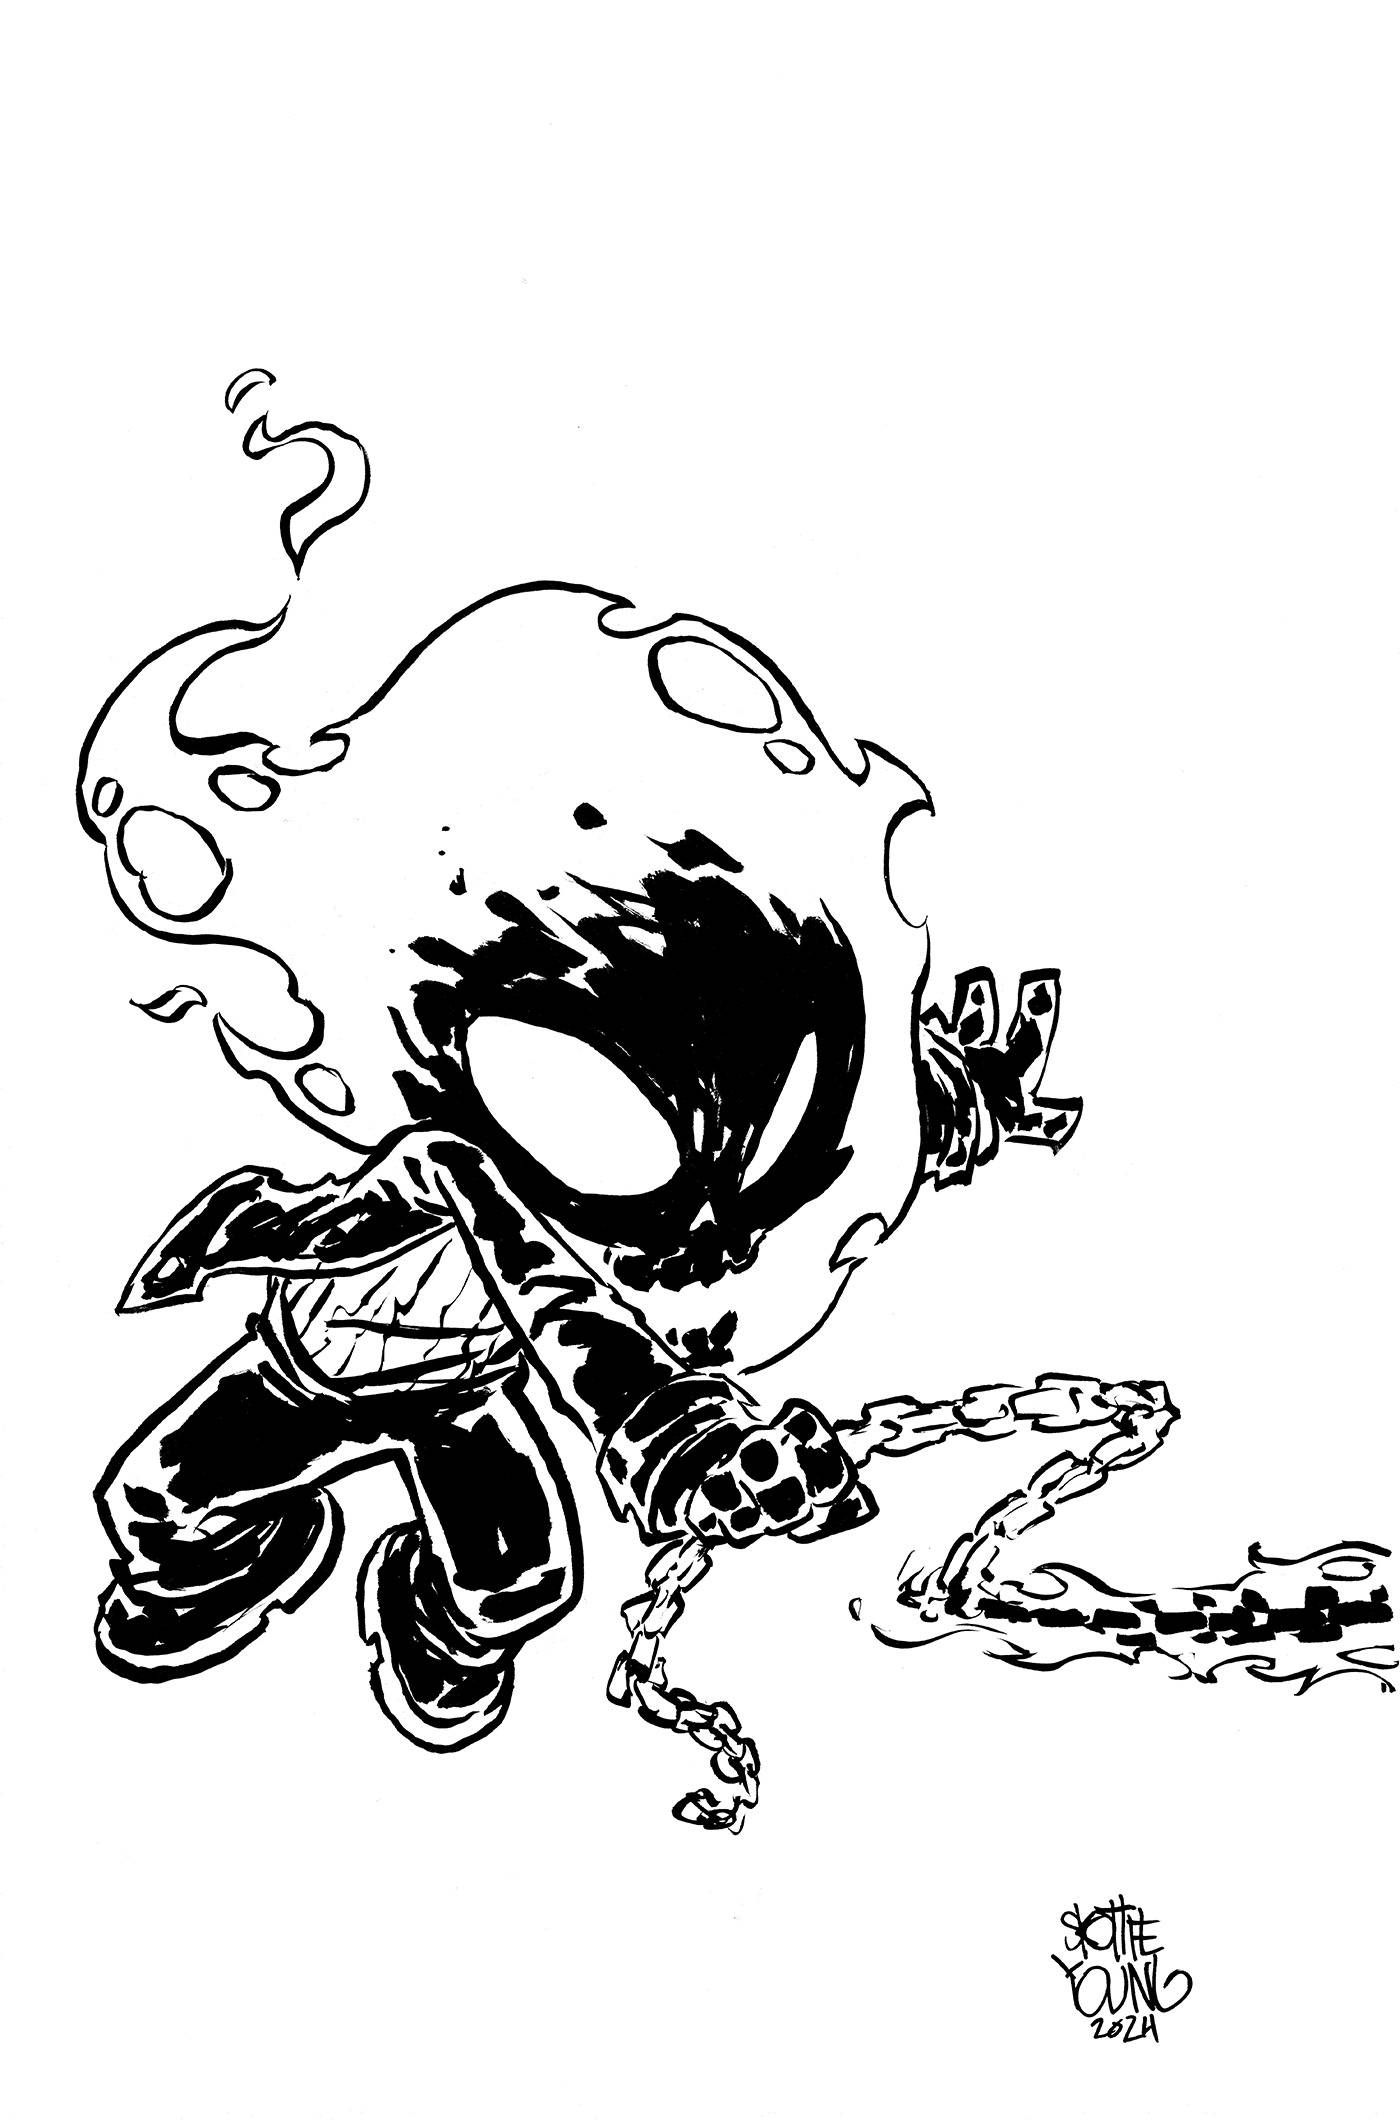 GHOST RIDER: FINAL VENGEANCE #4 SKOTTIE YOUNG'S BIG MARVEL VIRGIN BLACK AND WHIT E VARIANT [1:50] 06-05-24